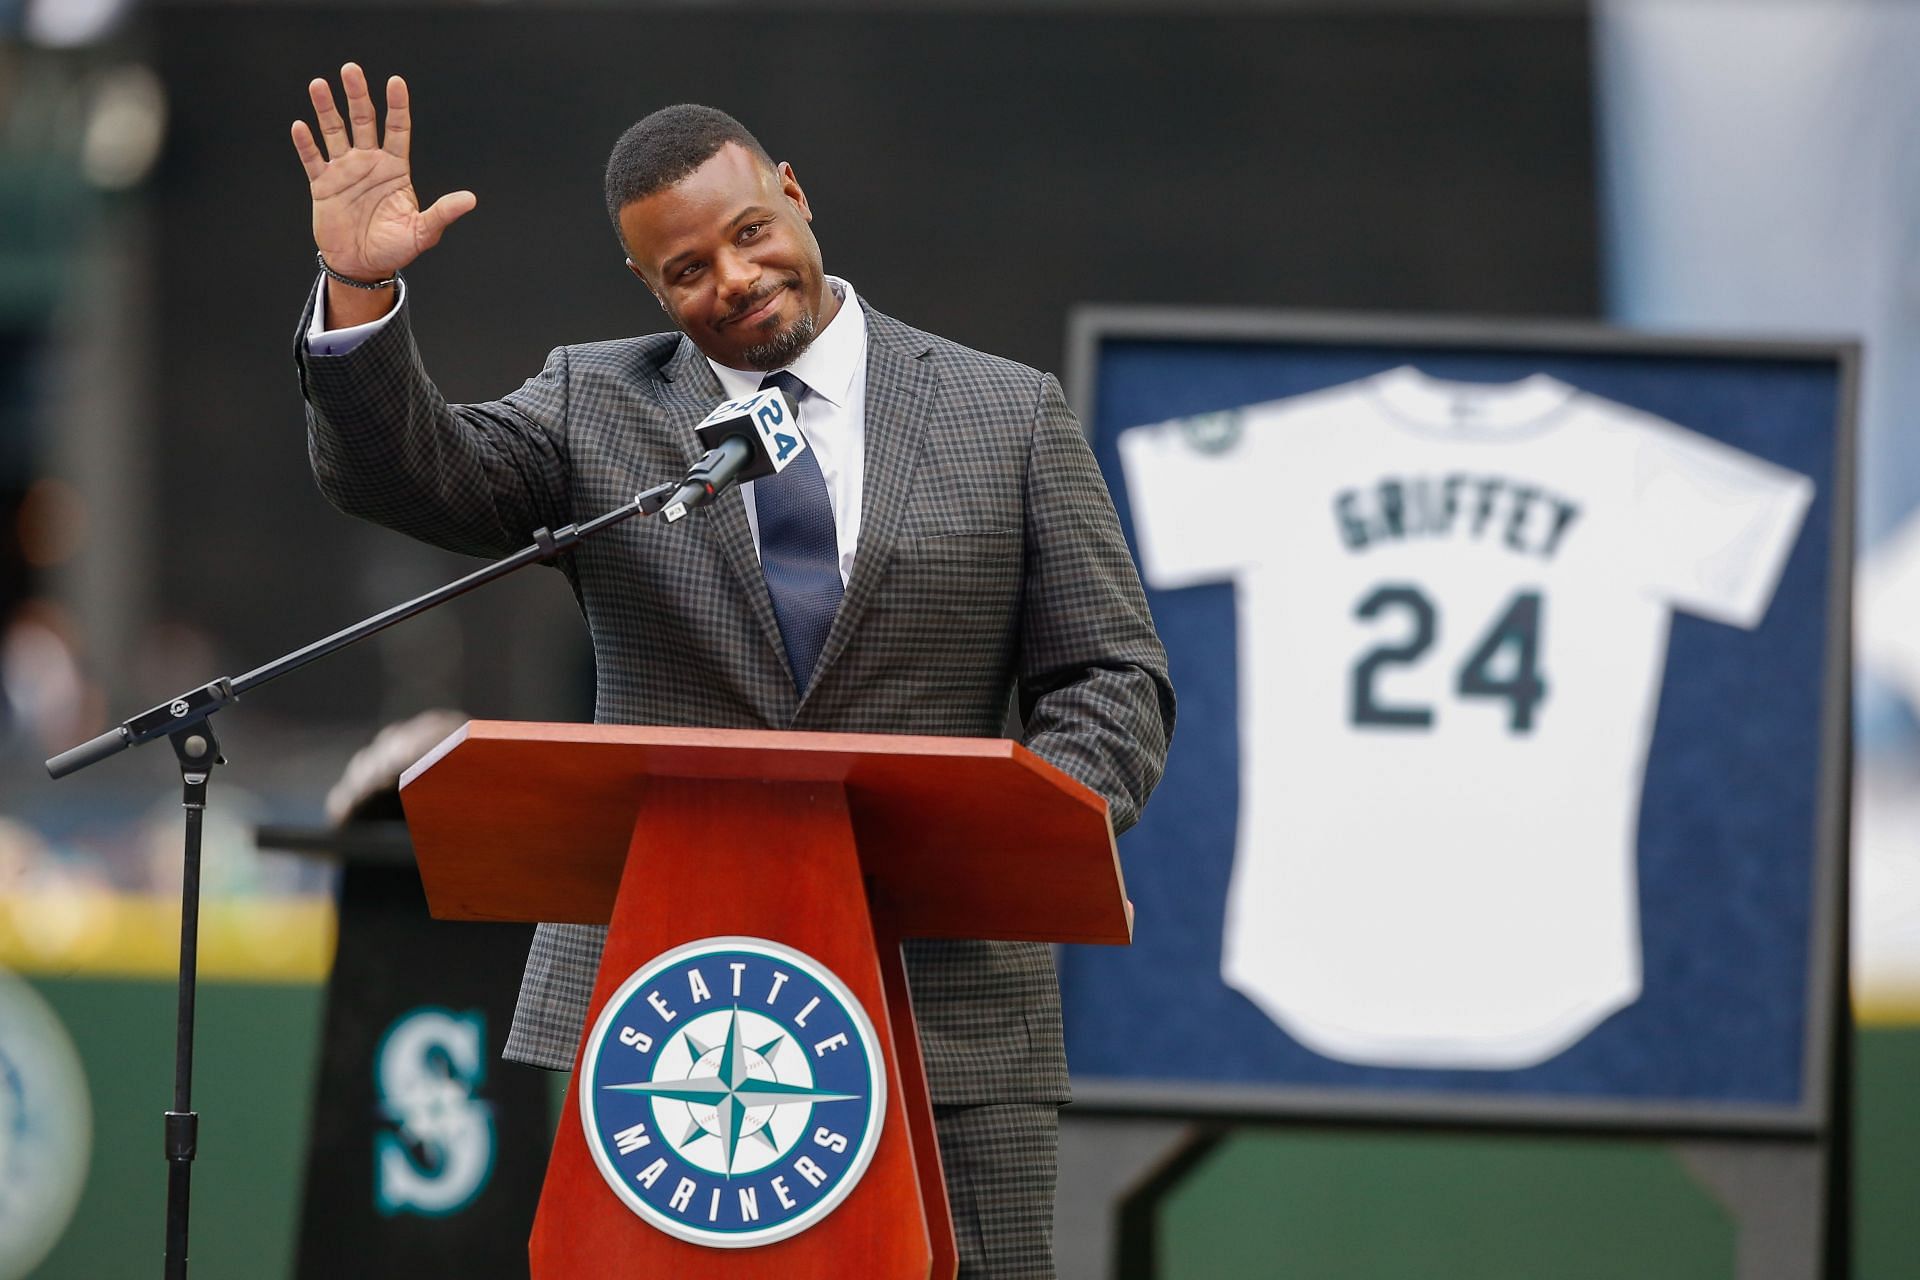 Former Mariner Ken Griffey Jr. waves to the crowd during a jersey retirement ceremony.